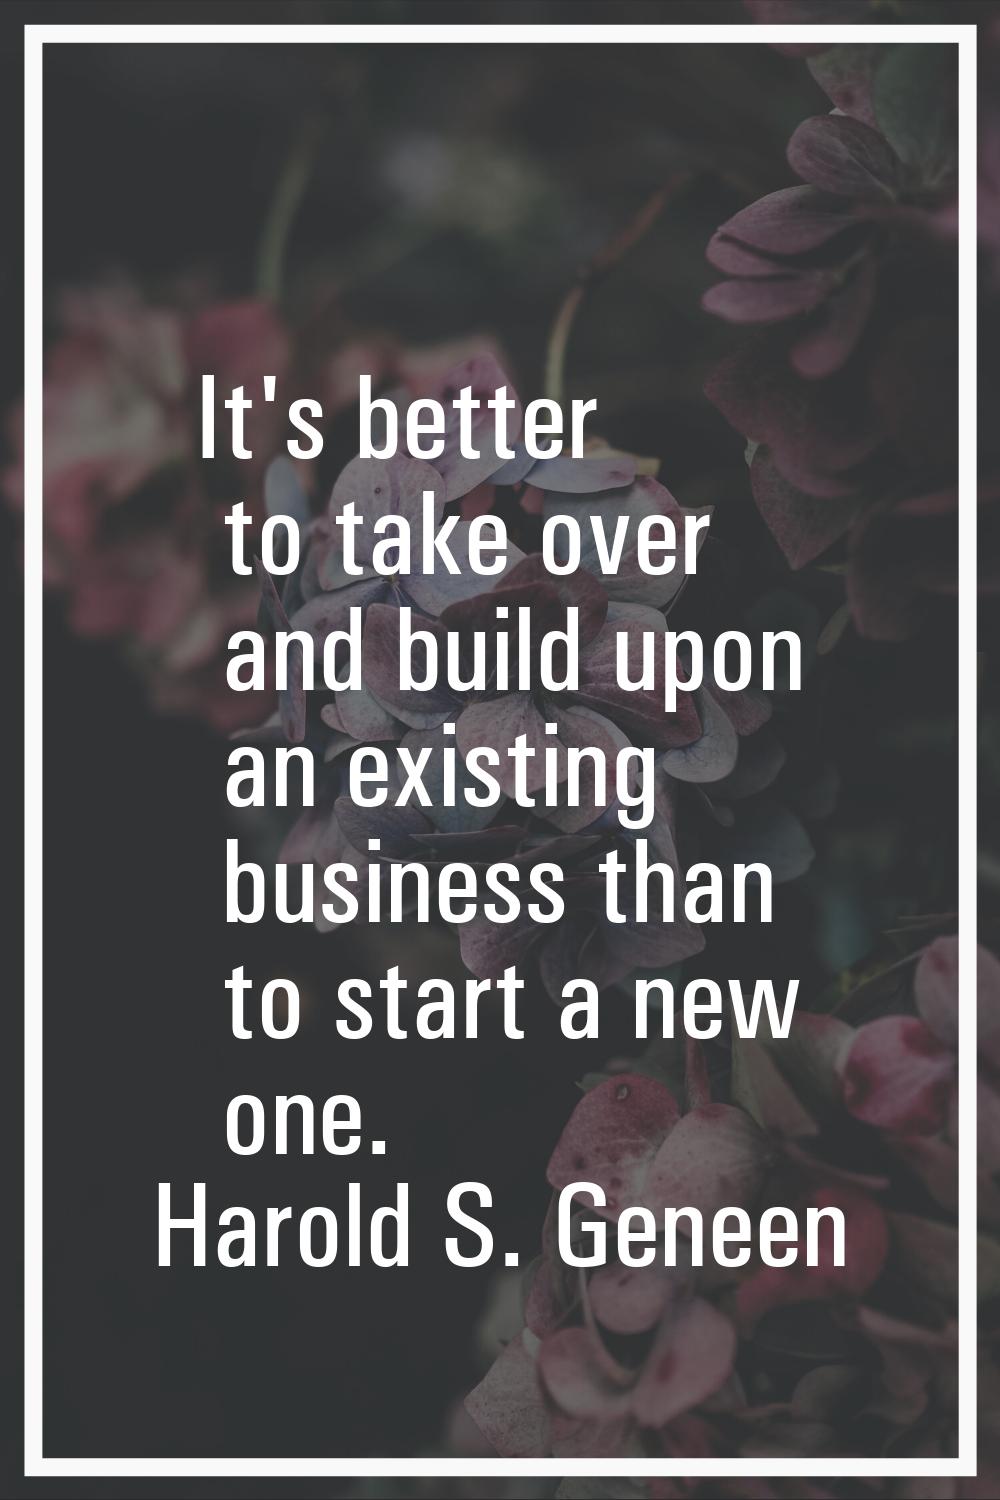 It's better to take over and build upon an existing business than to start a new one.